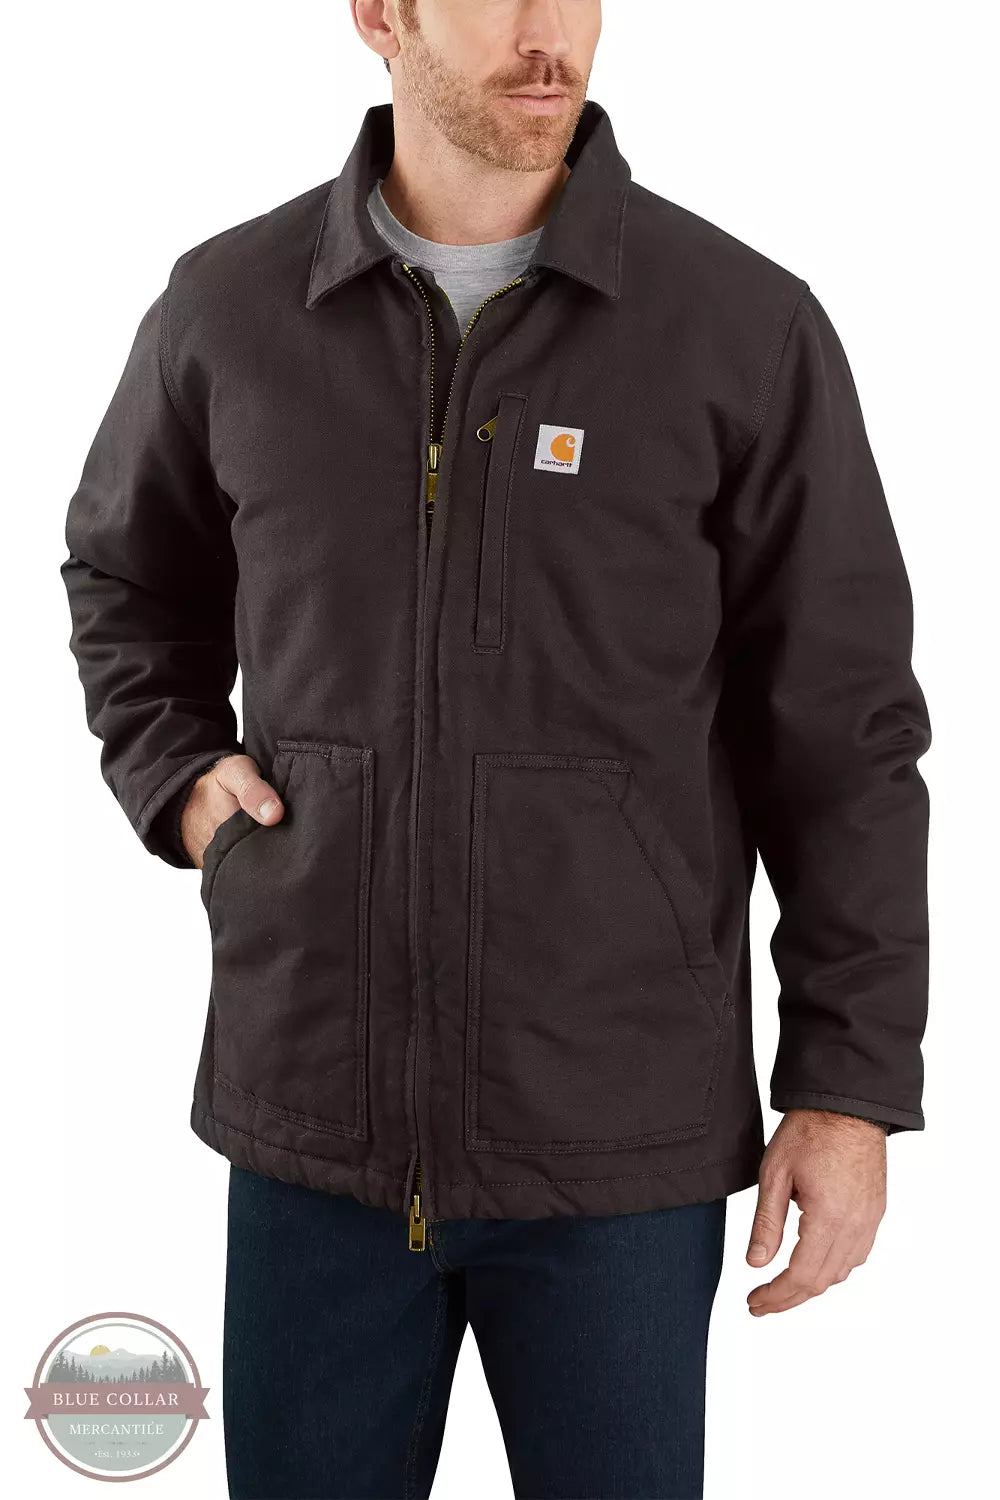 Loose Fitted Washed Duck Sherpa-Lined Coat by Carhartt 104293